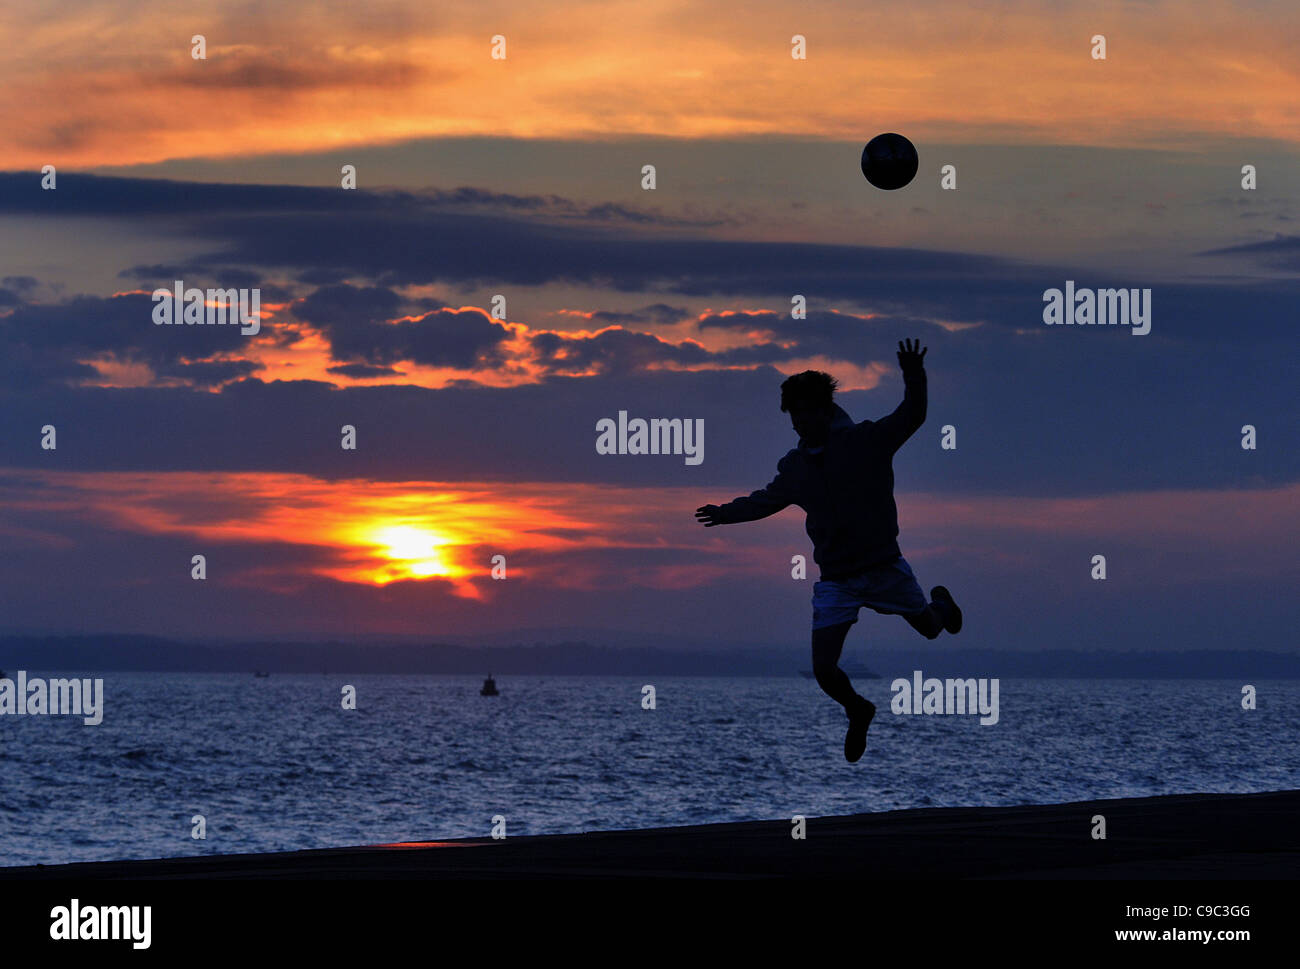 FOOTBALL AT SUNSET ON THE BEACH AT SOUTHSEA, HAMPSHIRE Stock Photo